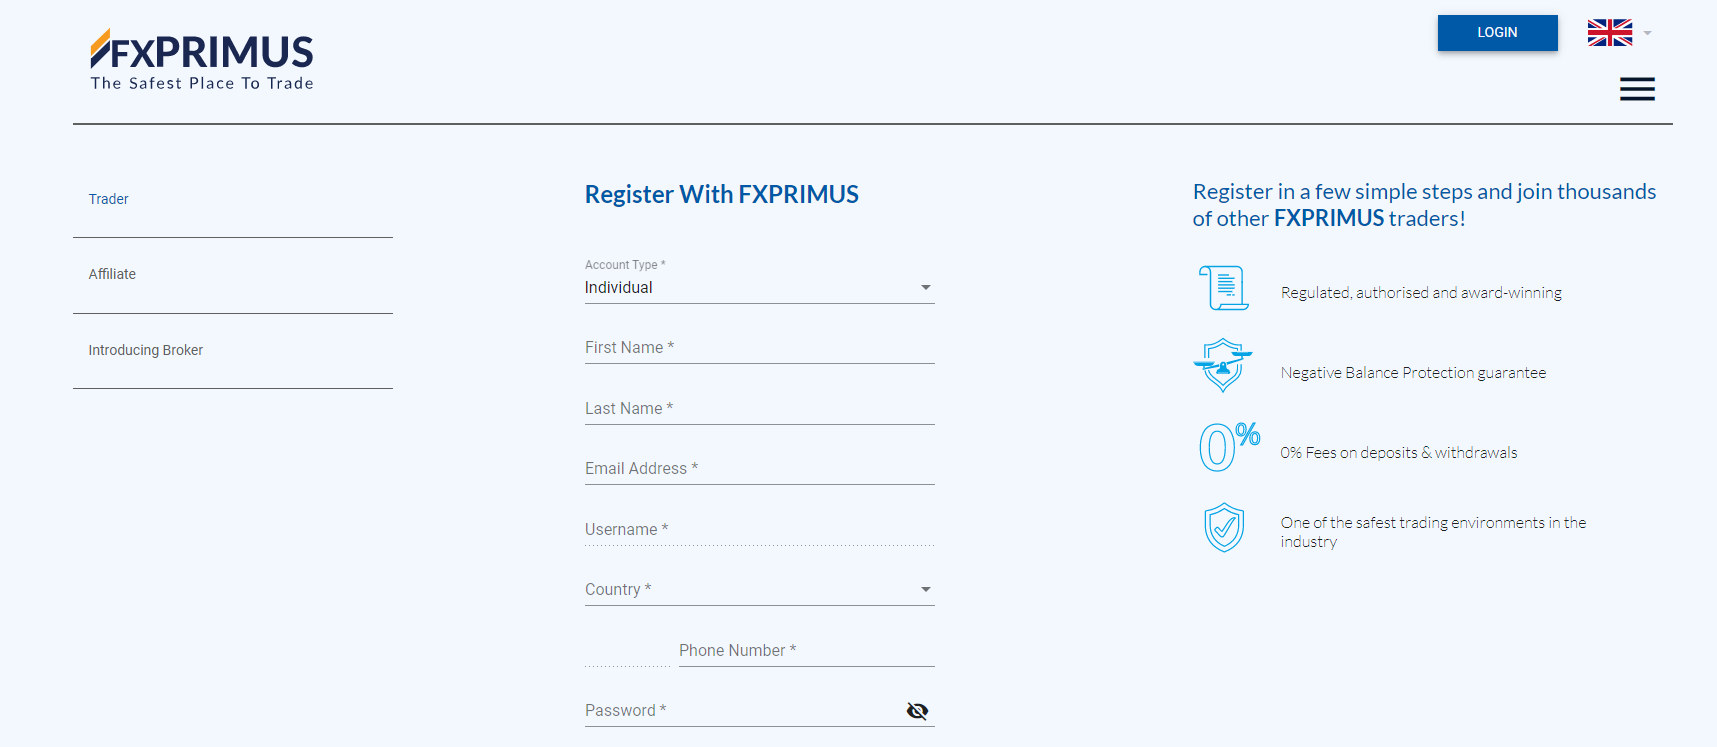 Register your free account with FXPRIMUS